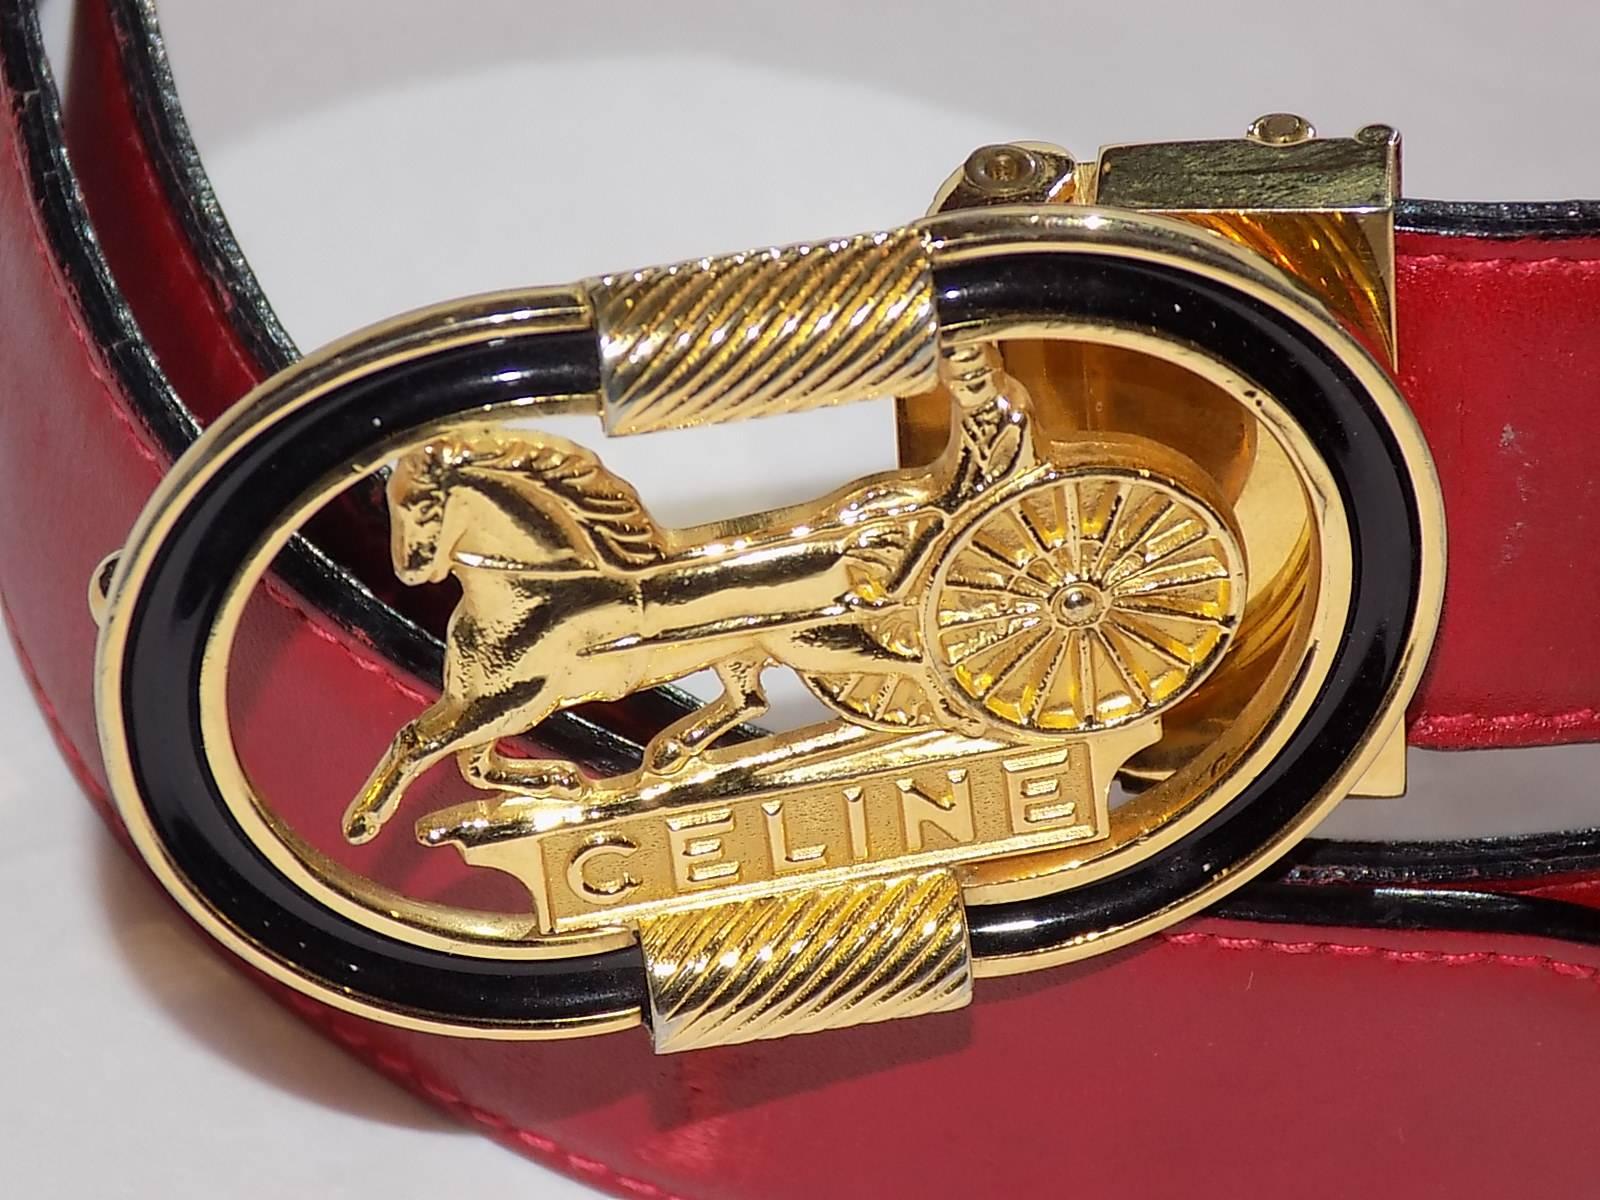 Fabulous Red Leather Celine Belt with gold tone oval buckle featuring Celine horse carriage logo. Black  Enamel painted rim. Pristine condition. Buckle is removable and belt strap could be replaced. 
Buckle size Approx : 2 1/4